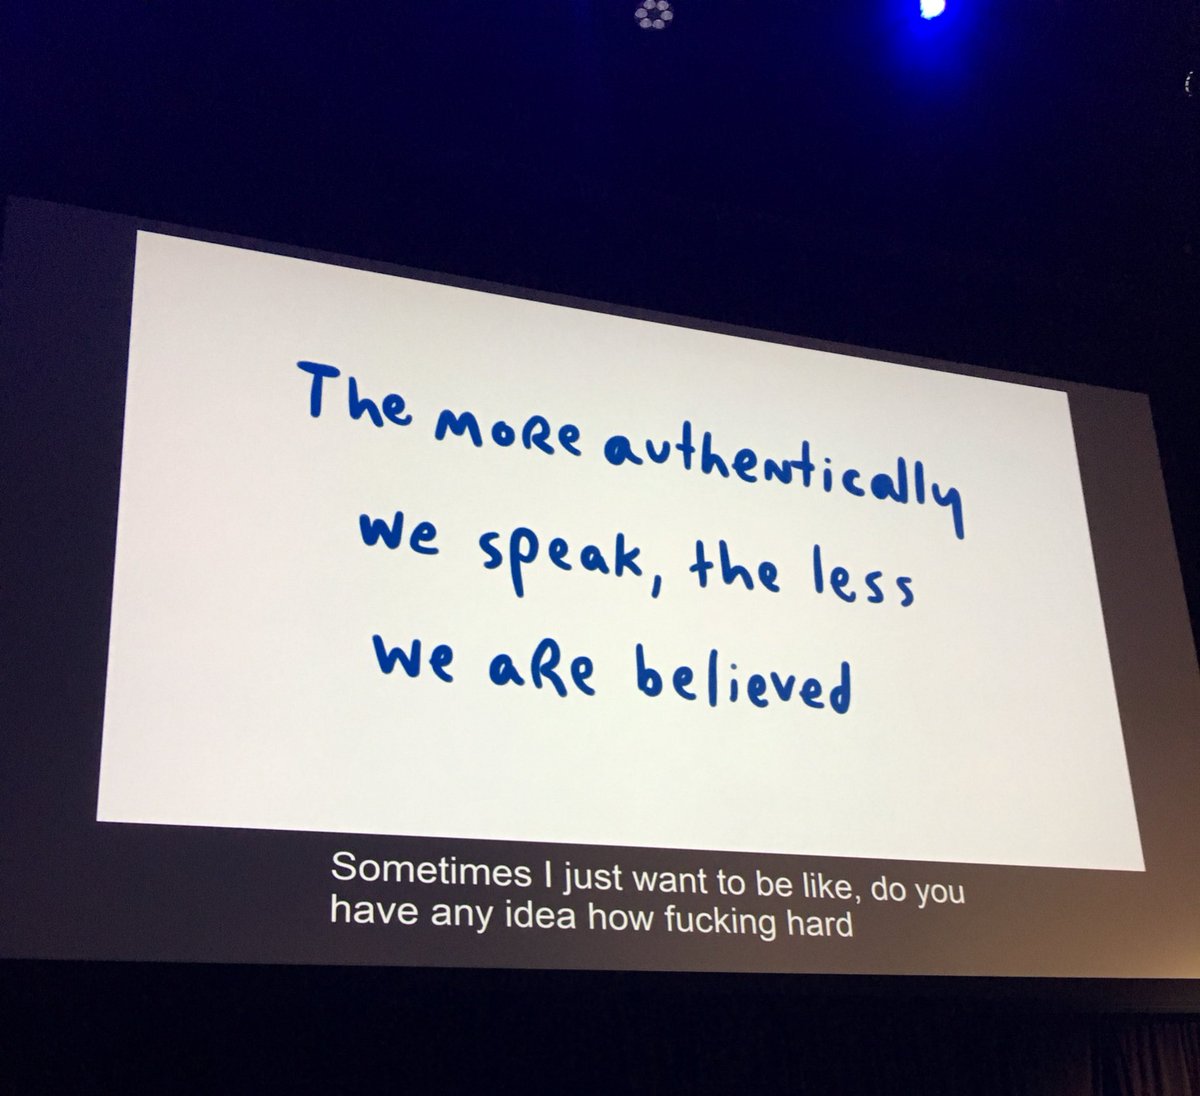 Such fresh perspective on empathy by @elizejackson #IxD19